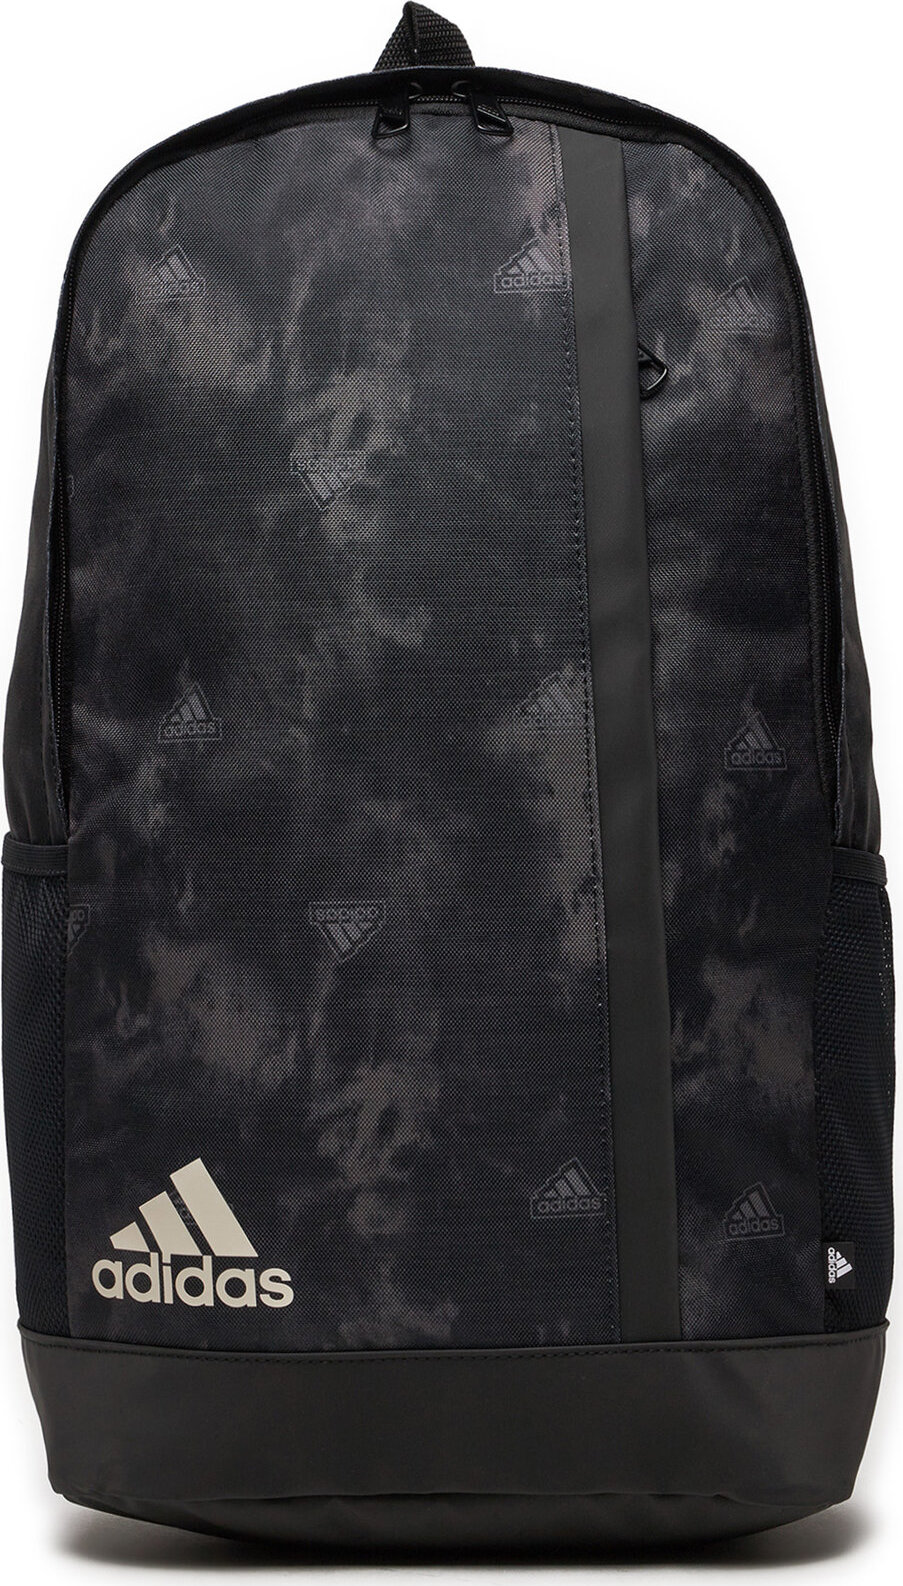 Batoh adidas Linear Graphic Backpack IS3783 Black/Chacoa/White